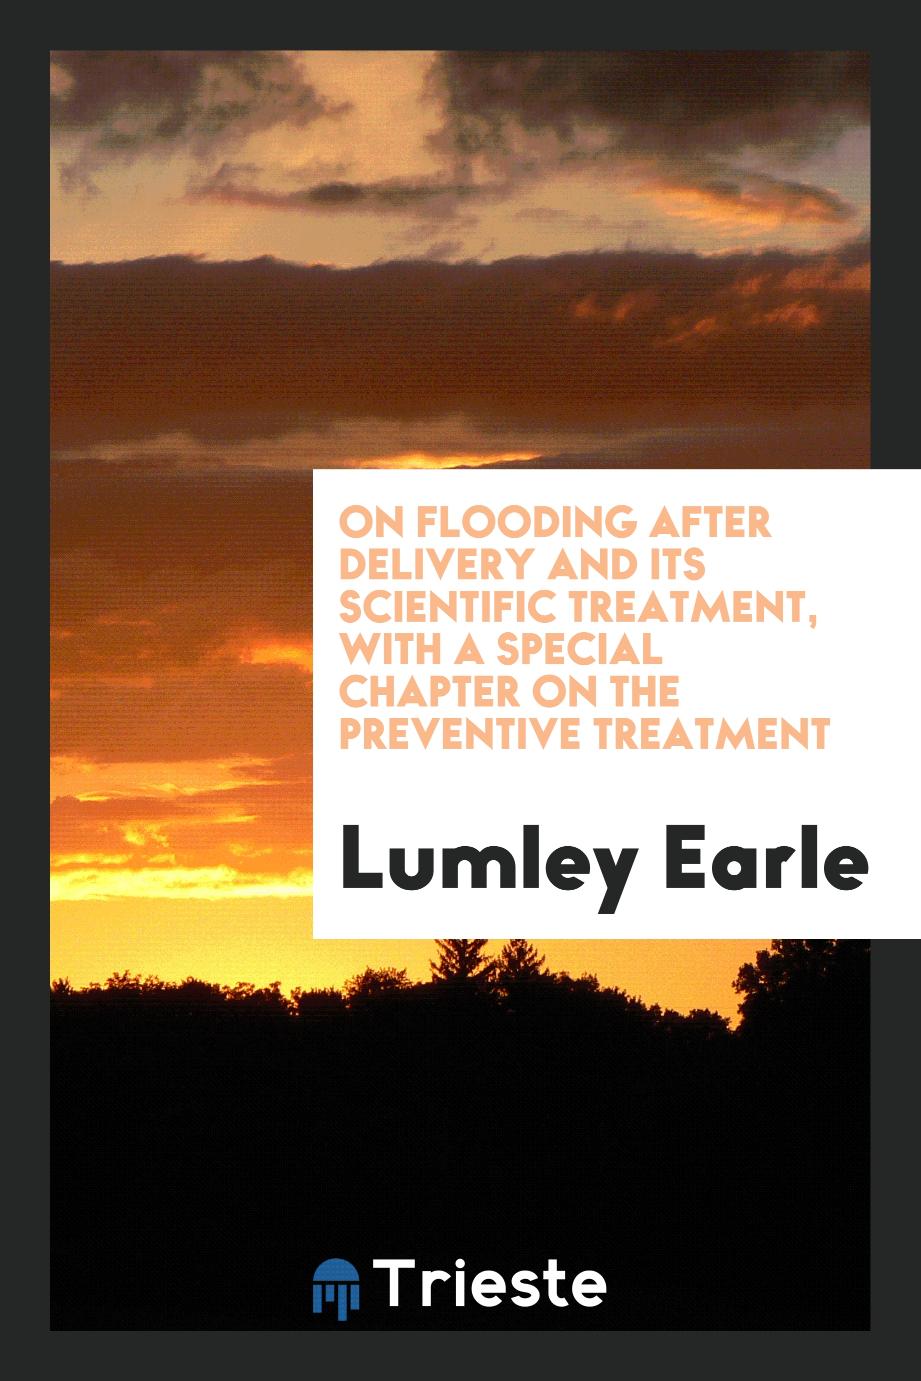 On Flooding after Delivery and Its Scientific Treatment, with a Special Chapter on the Preventive Treatment